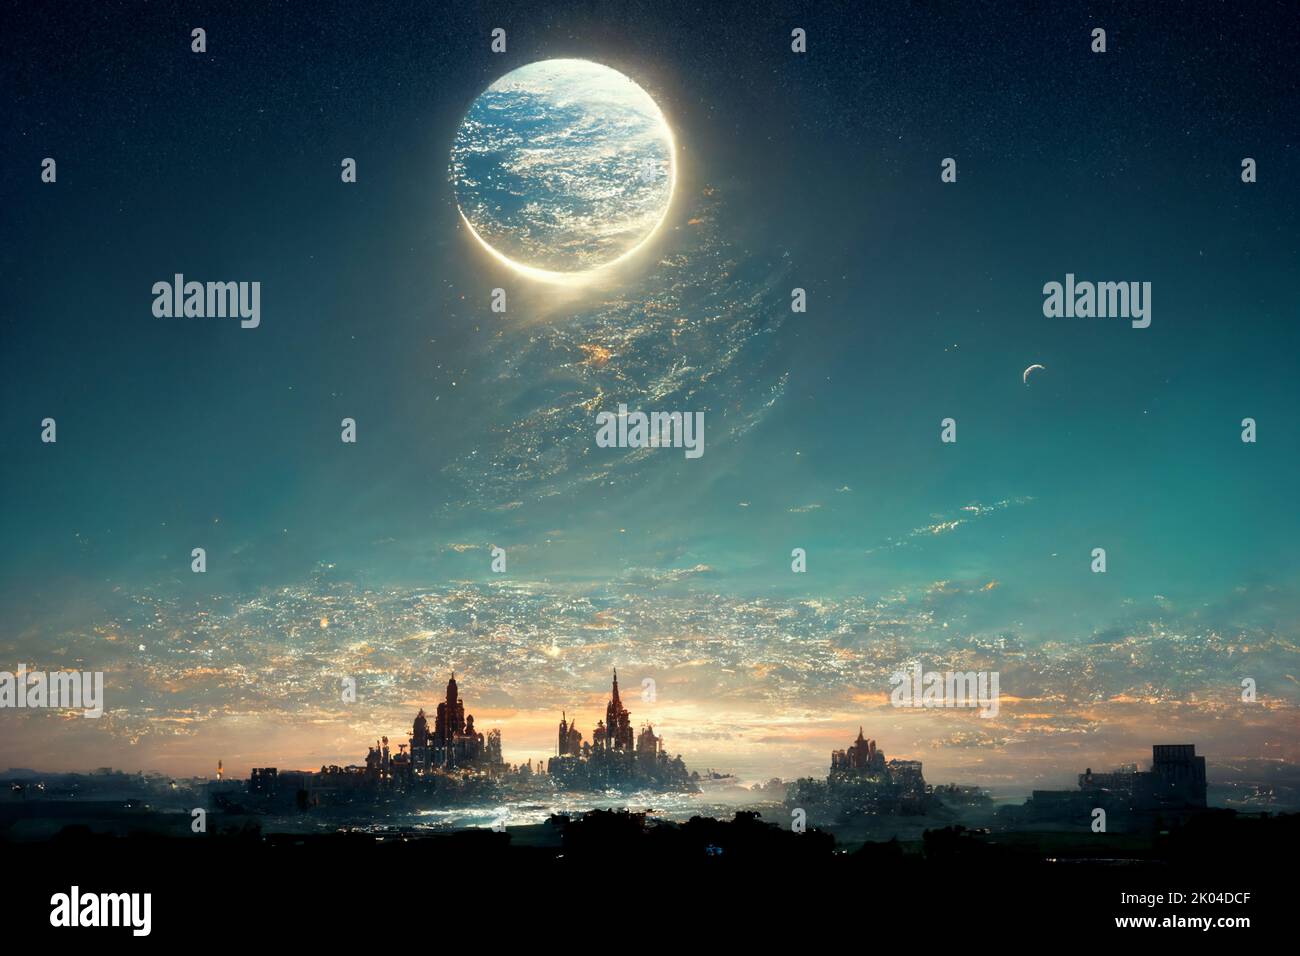 Imaginary fantasy world under moon on blue starry sky, abstract background Stock Photo